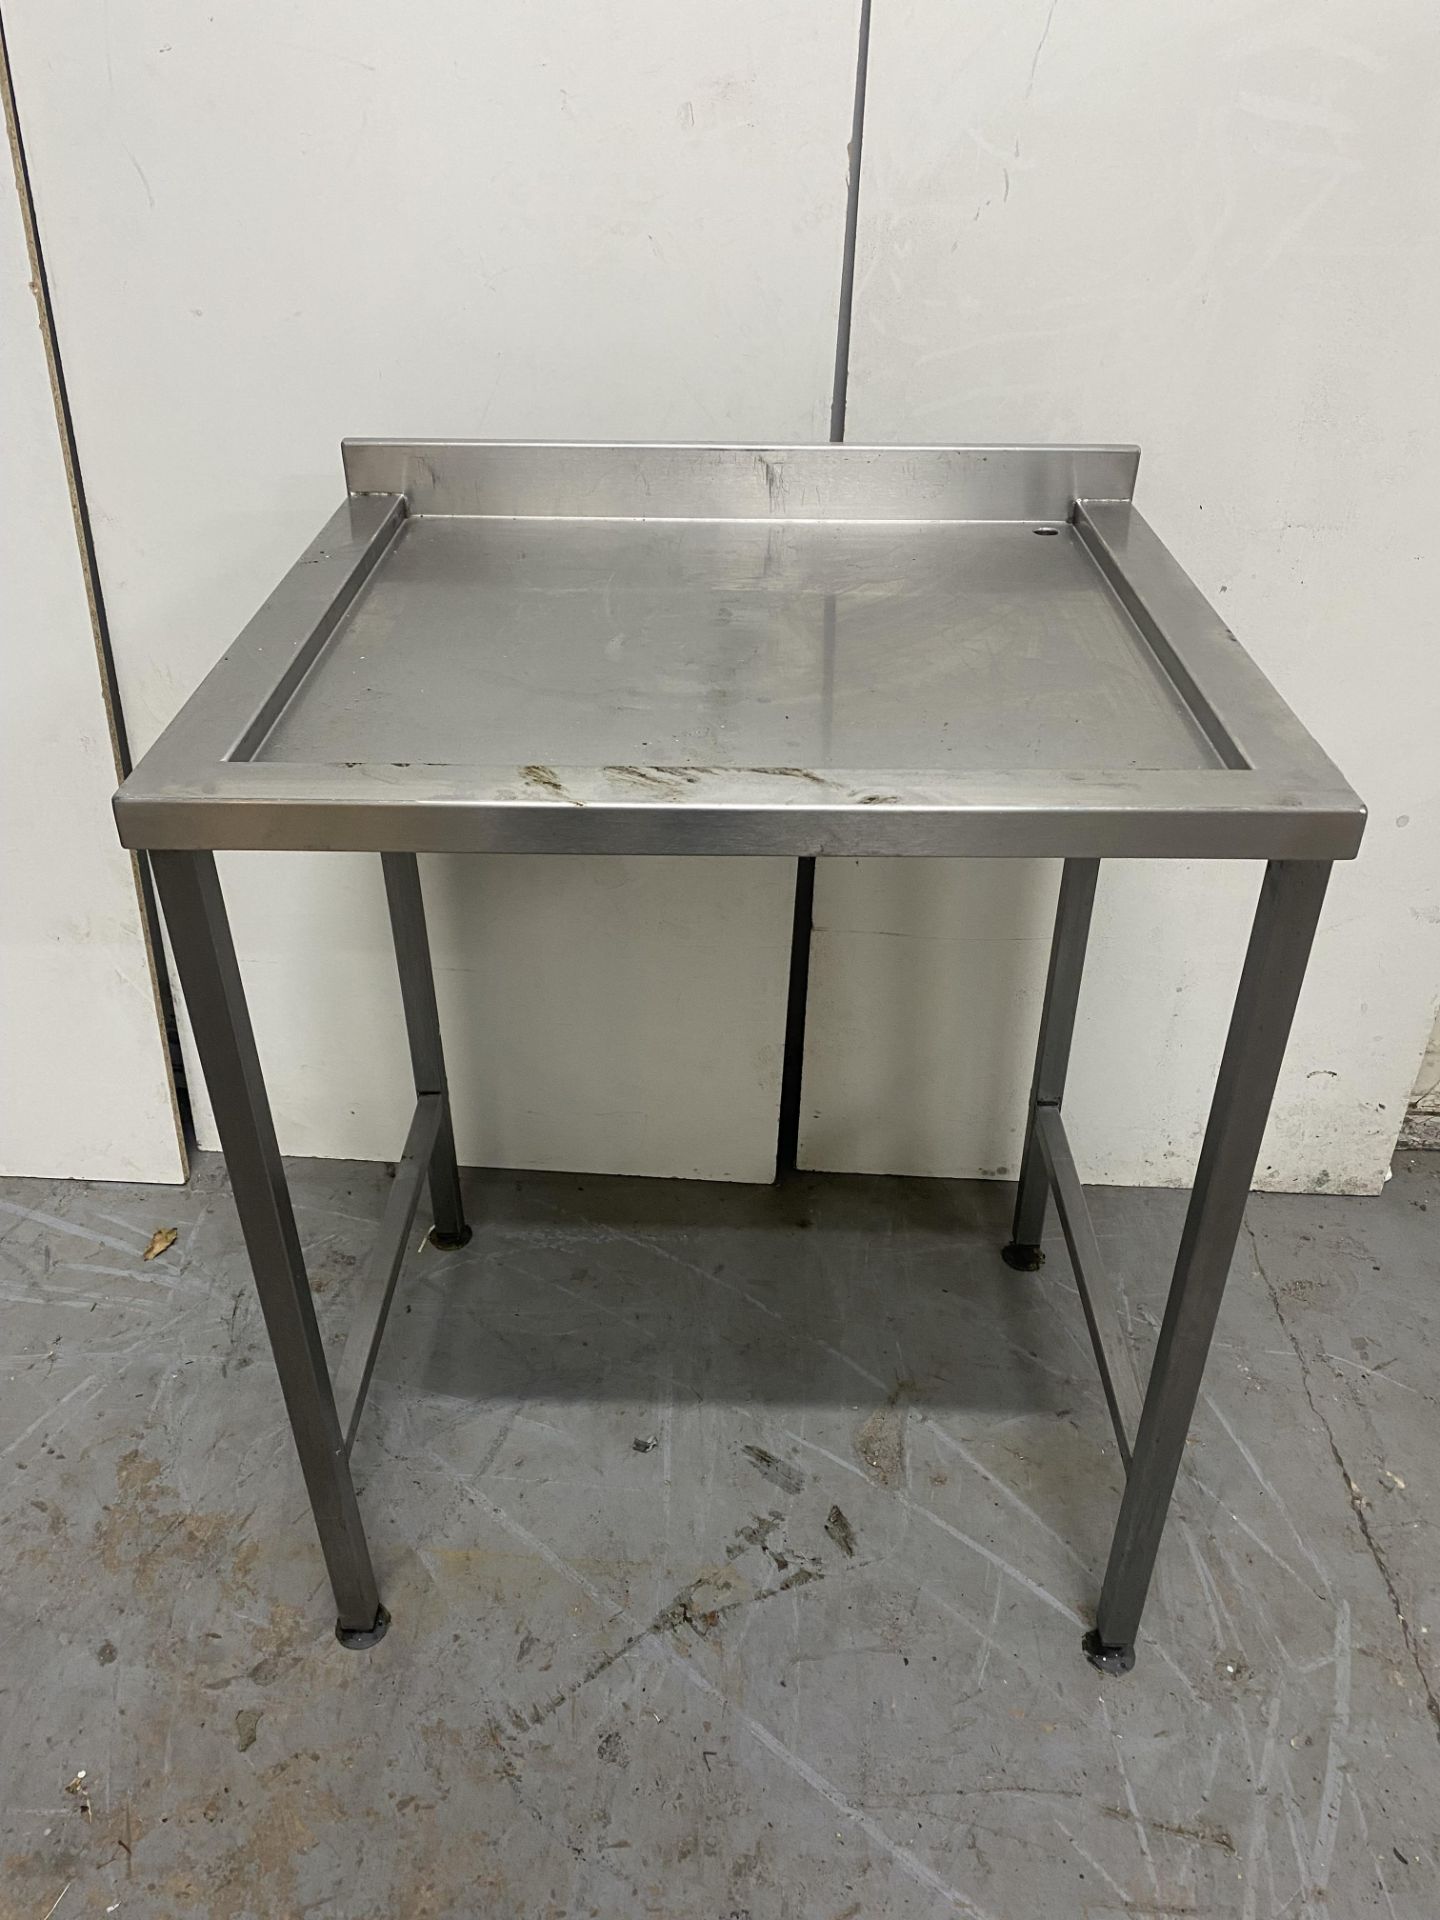 750mm Stainless Steel Catering Preperation Table - Image 2 of 5